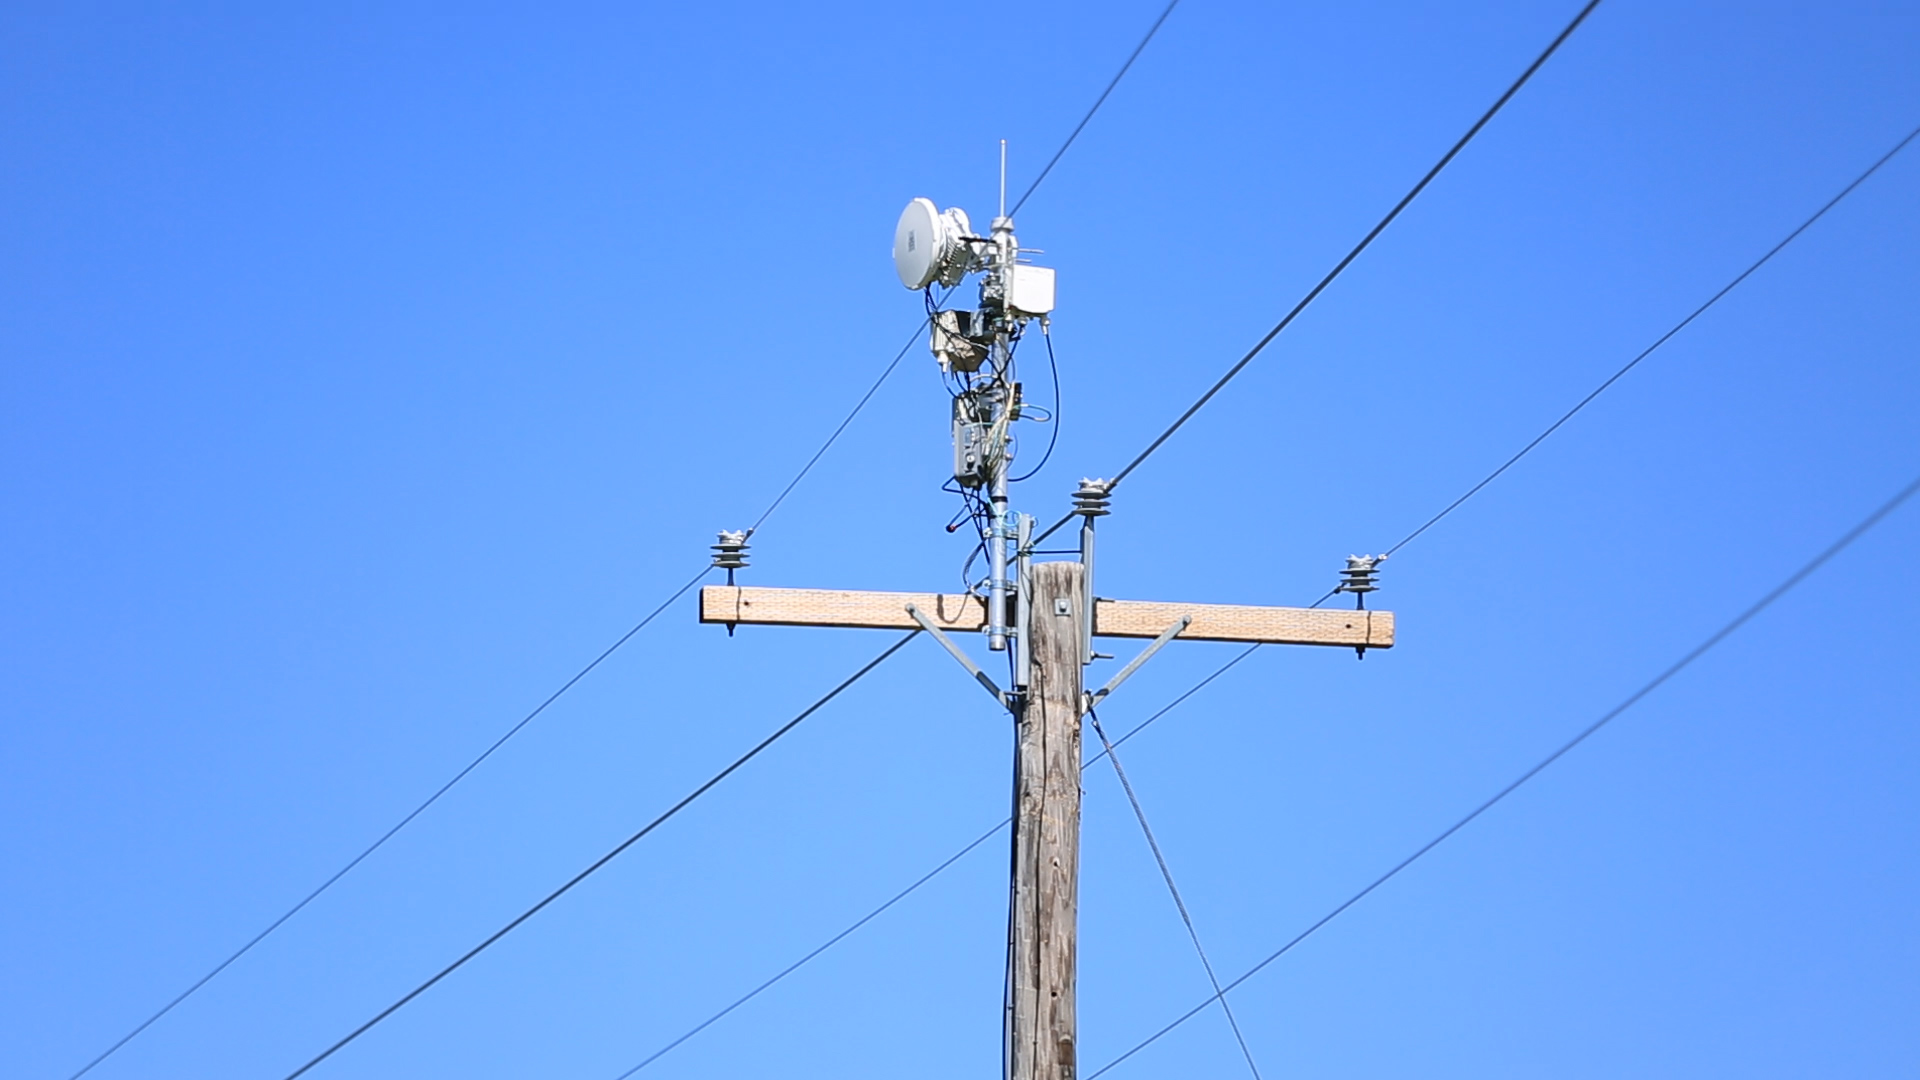 Wireless hardware developed by AT&T upgrades electrical poles to deliver high-speed wireless broadband.